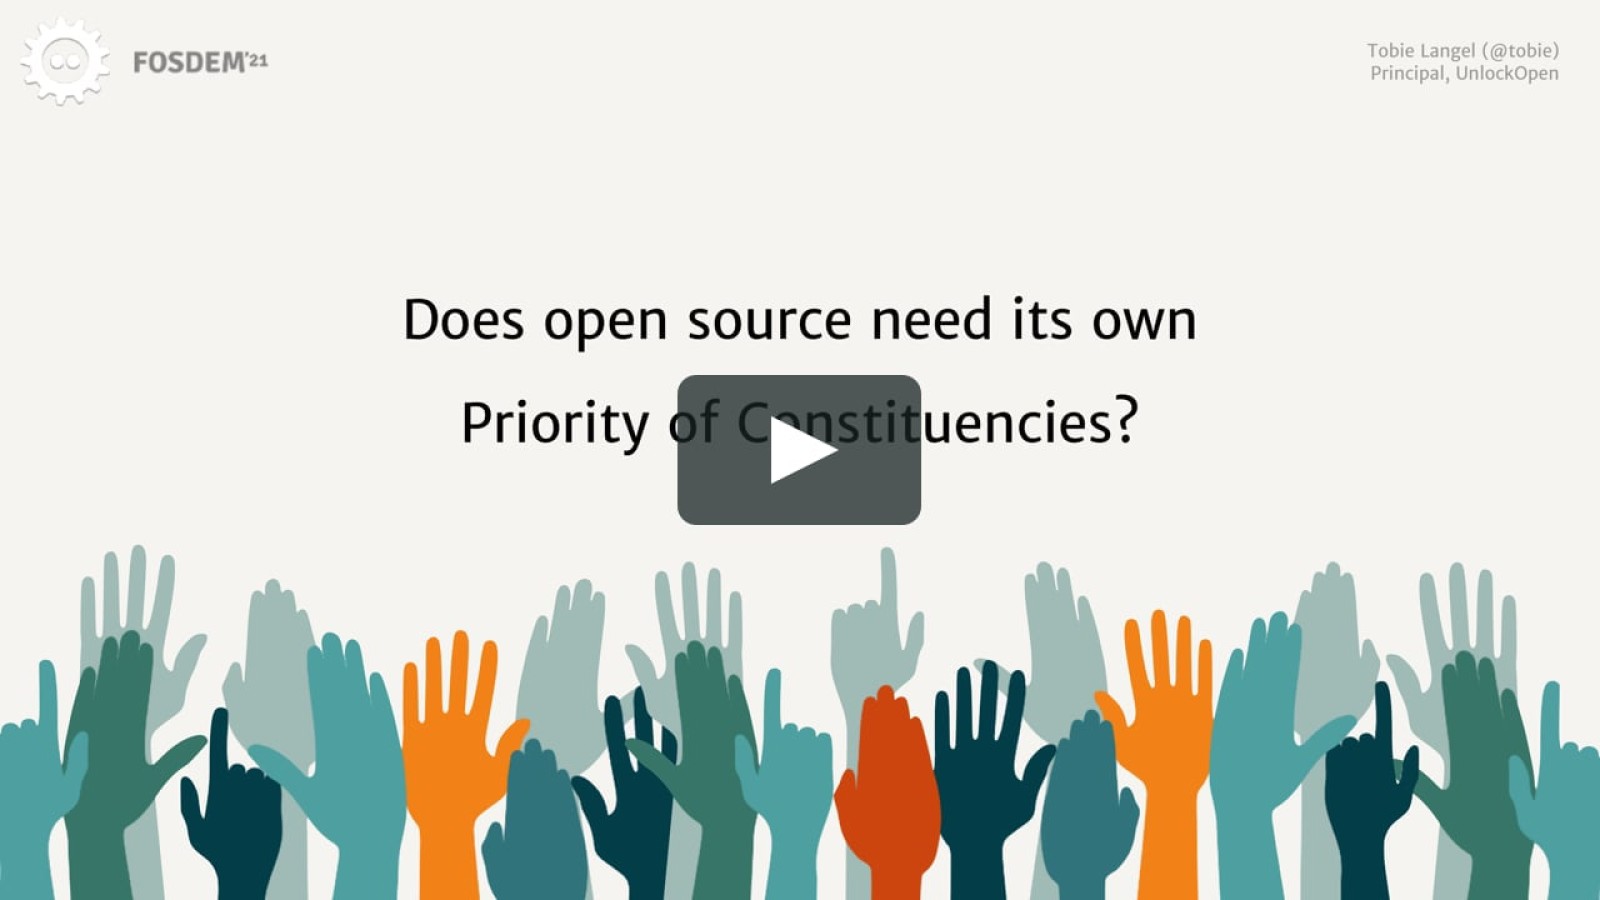 Does open source need its own Priority of Constituencies?